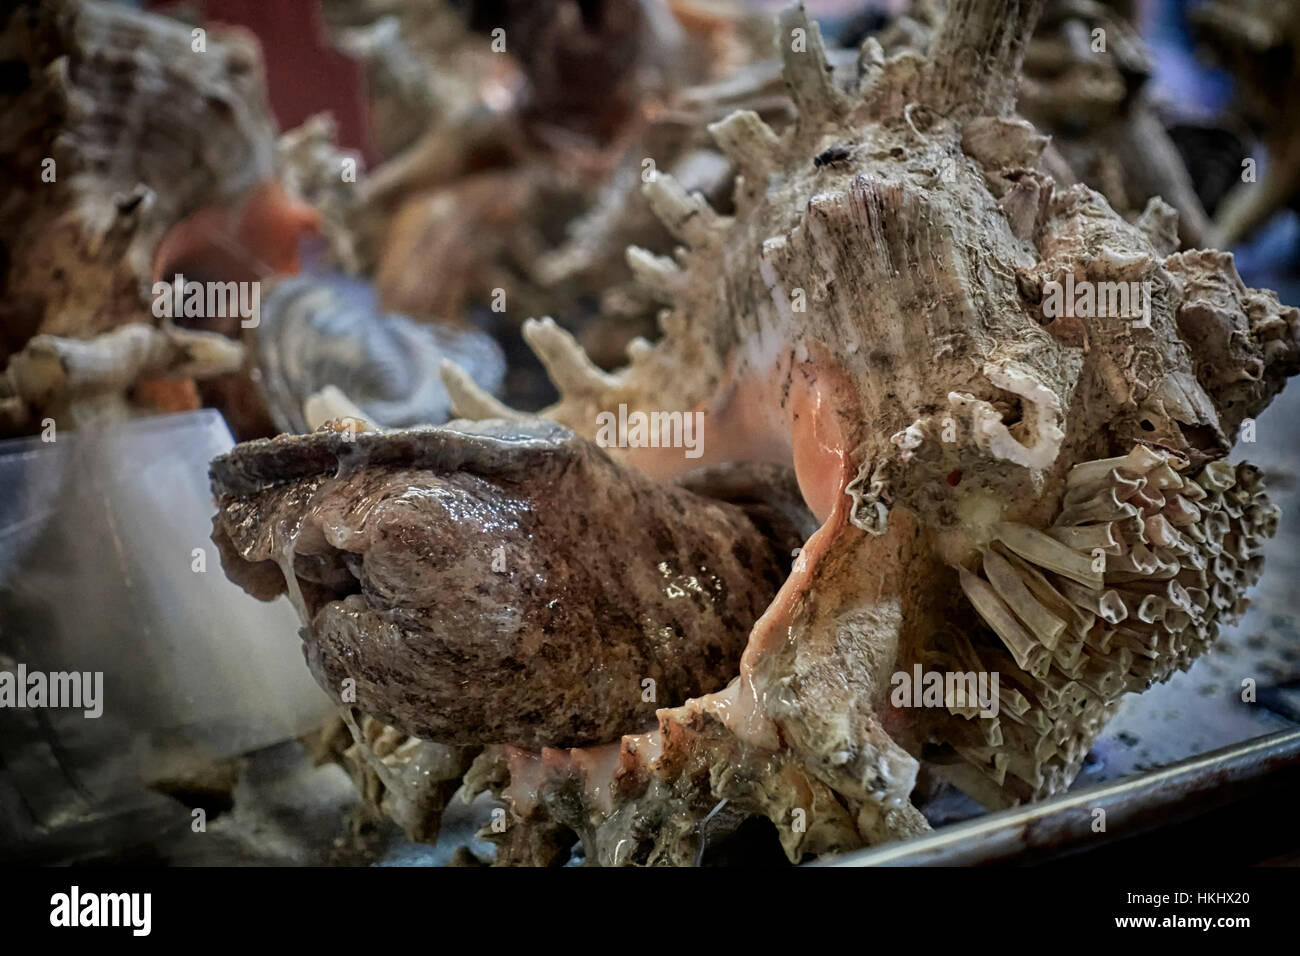 Conch (Yidd) live giant sea snail on sale at a Thailand seafood market stall. Thailand Asia. Lobatus gigas Stock Photo